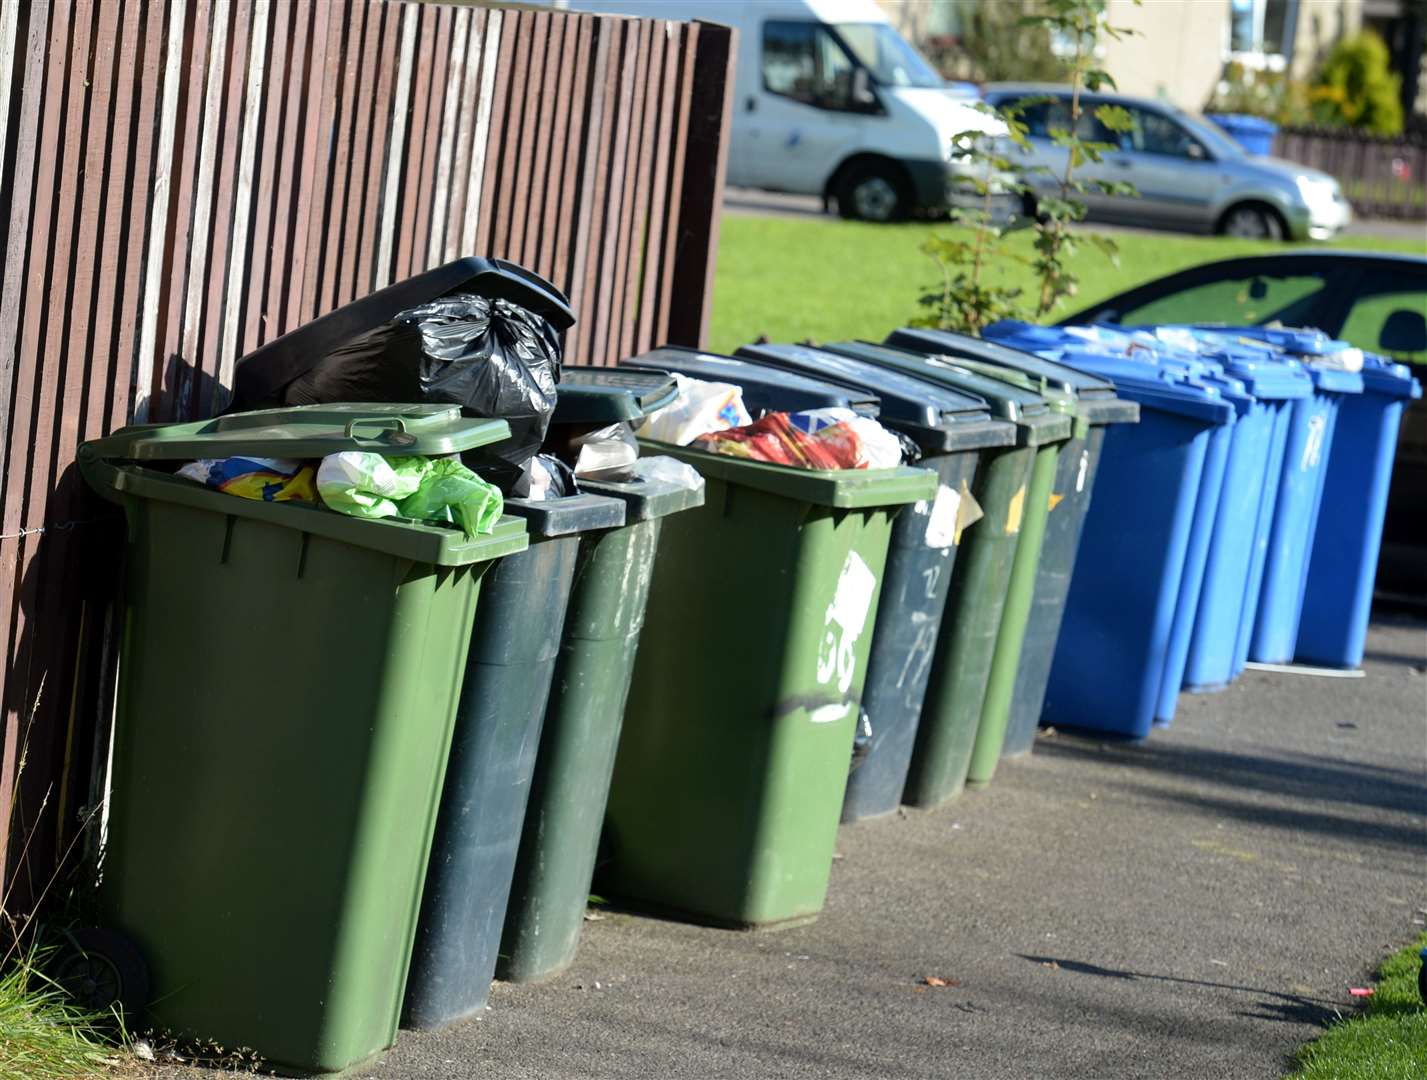 Changes will be made to waste collection services from next week.